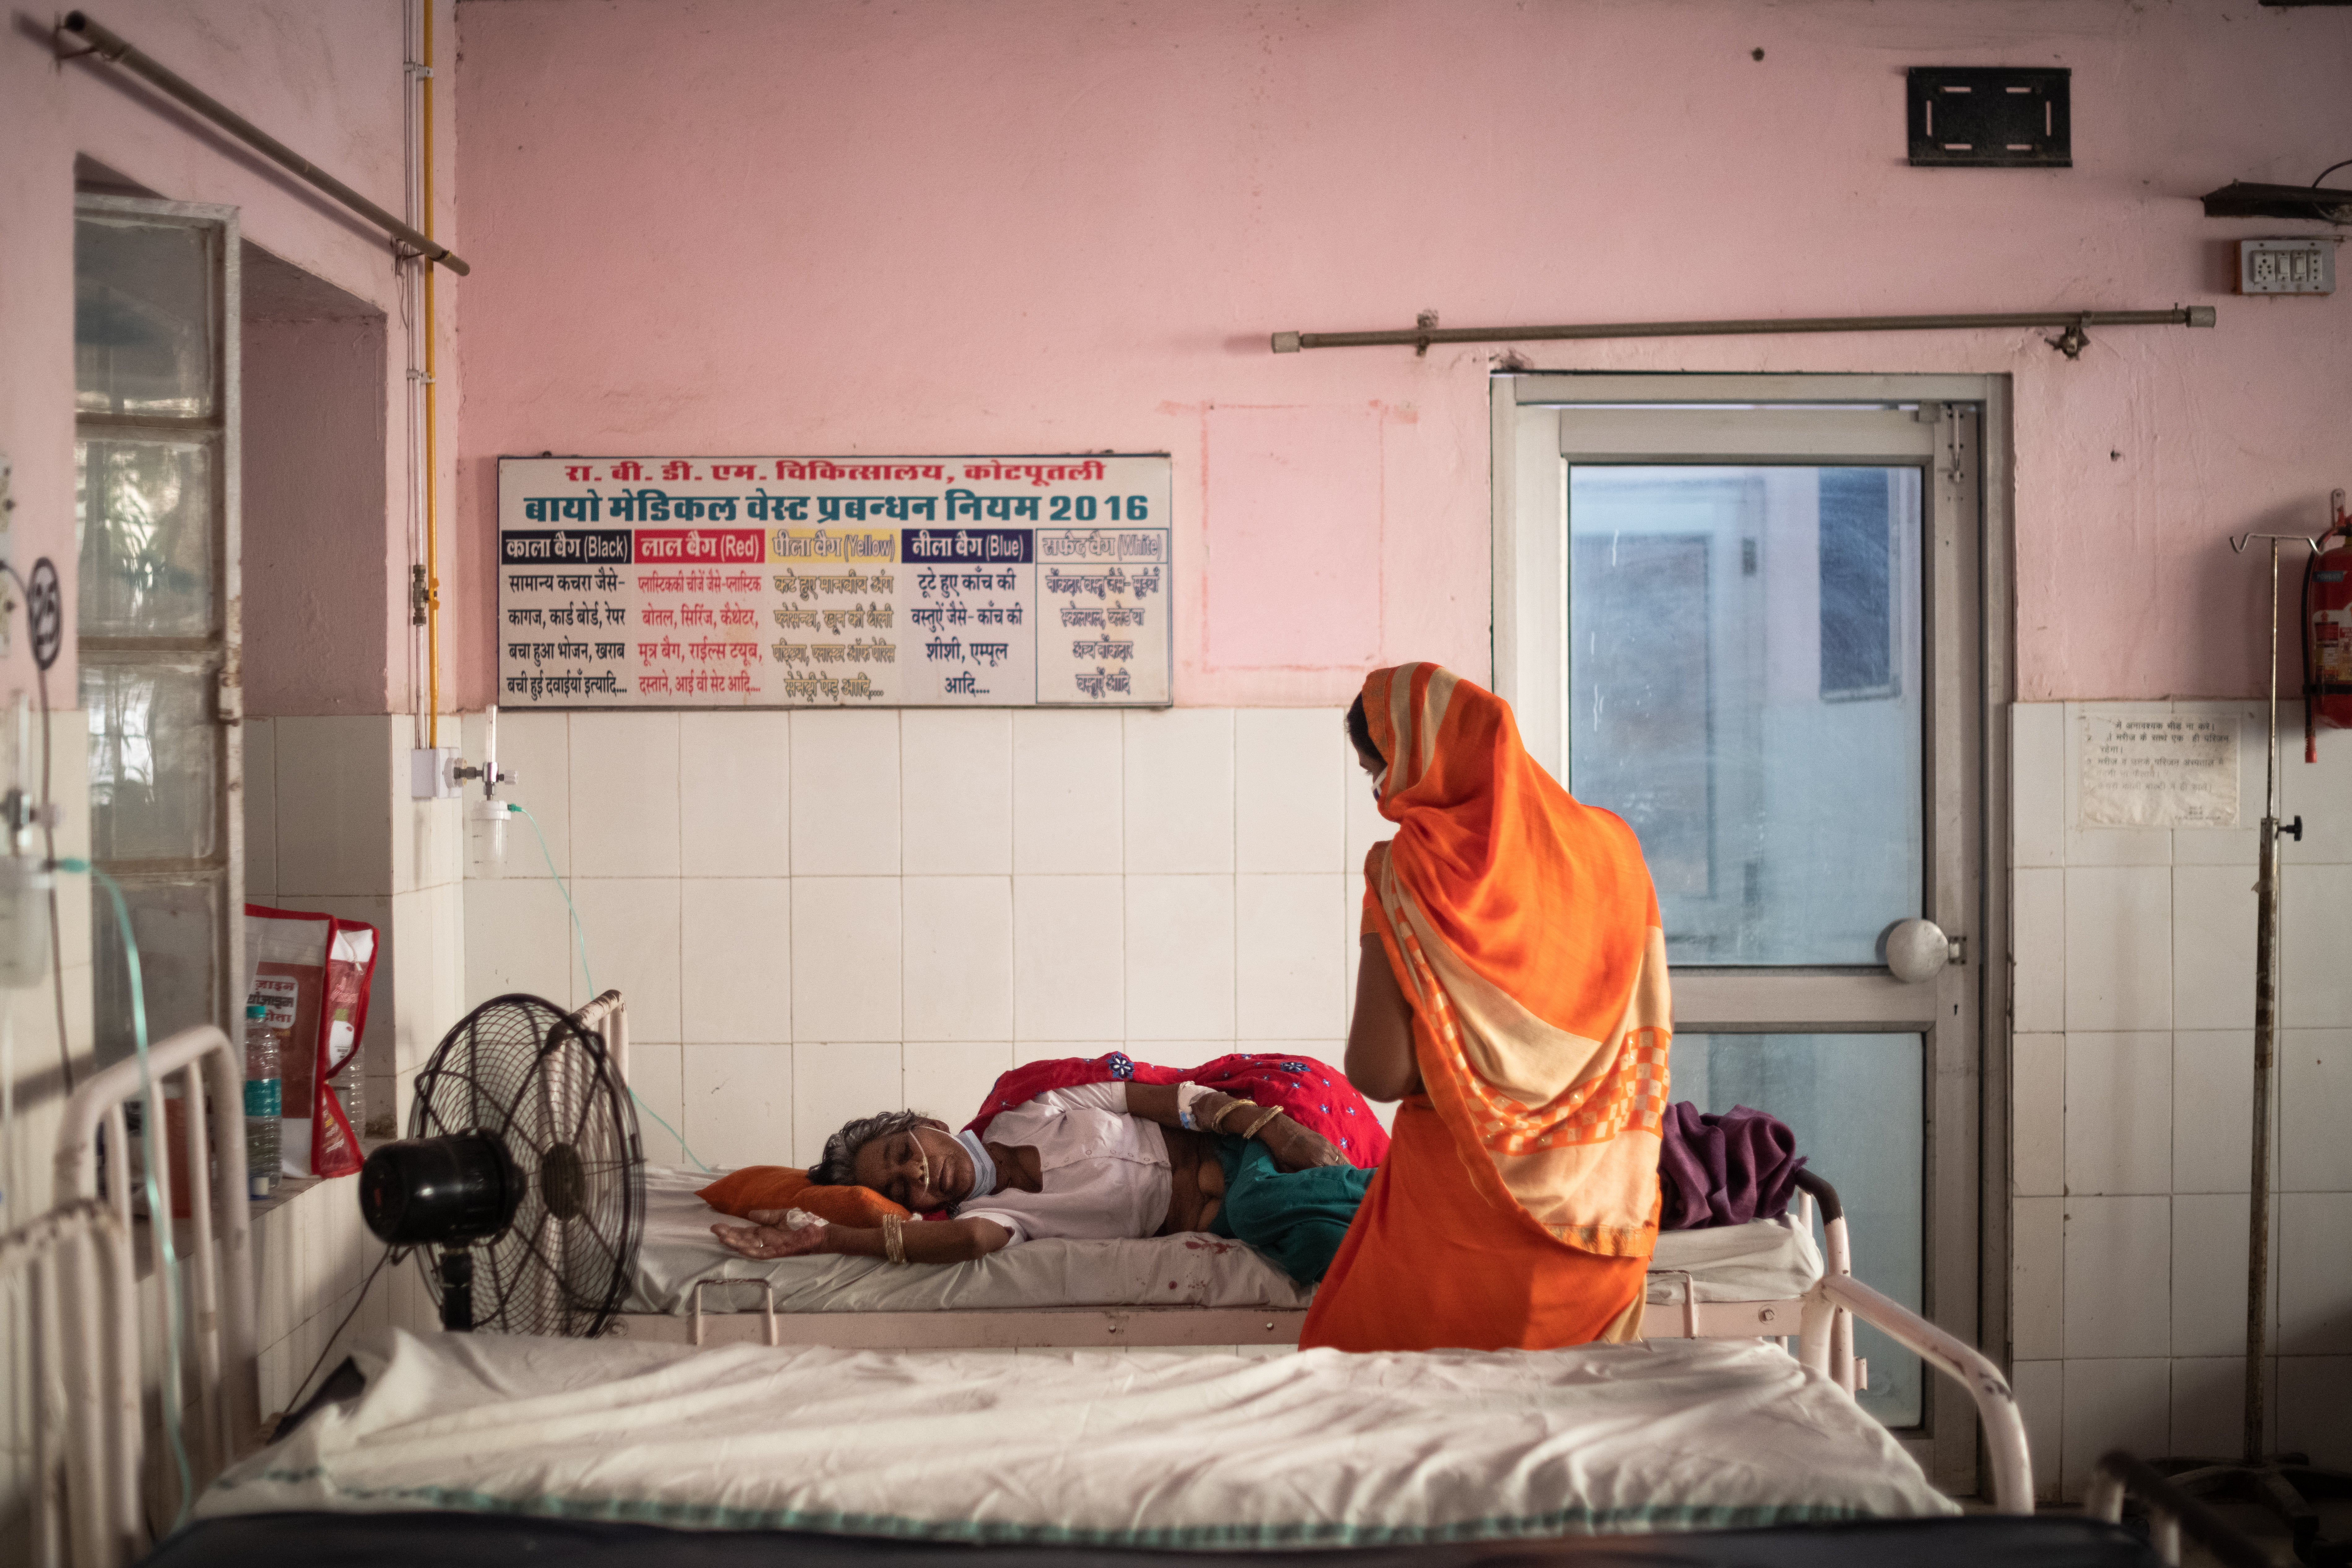 A Covid patient is treated with oxygen at a hospital in Rajasthan, India